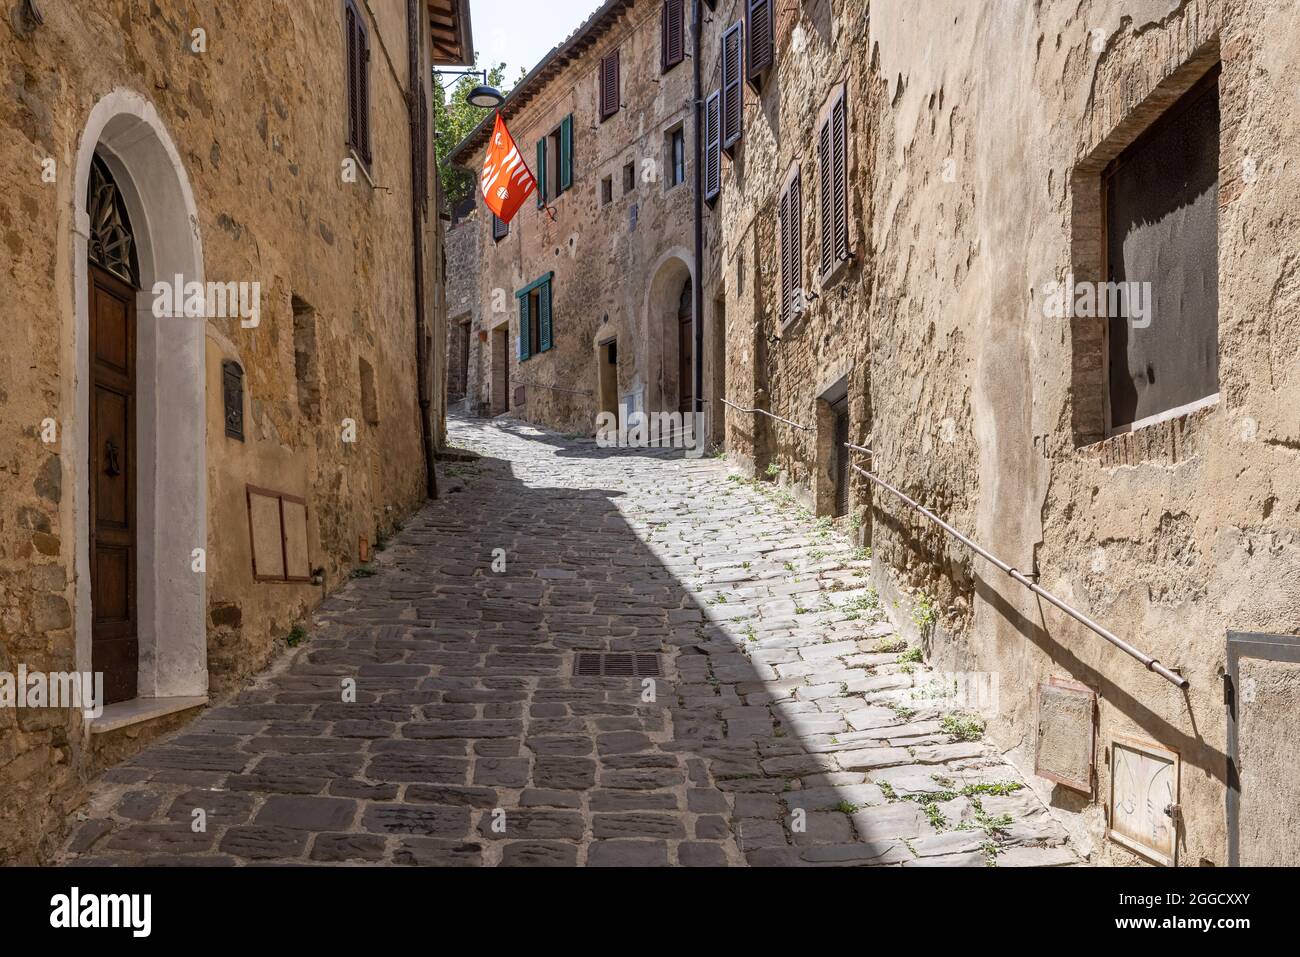 A narrow medieval stone paved street with a red waving flag in the tuscanian town of Montalcino Stock Photo